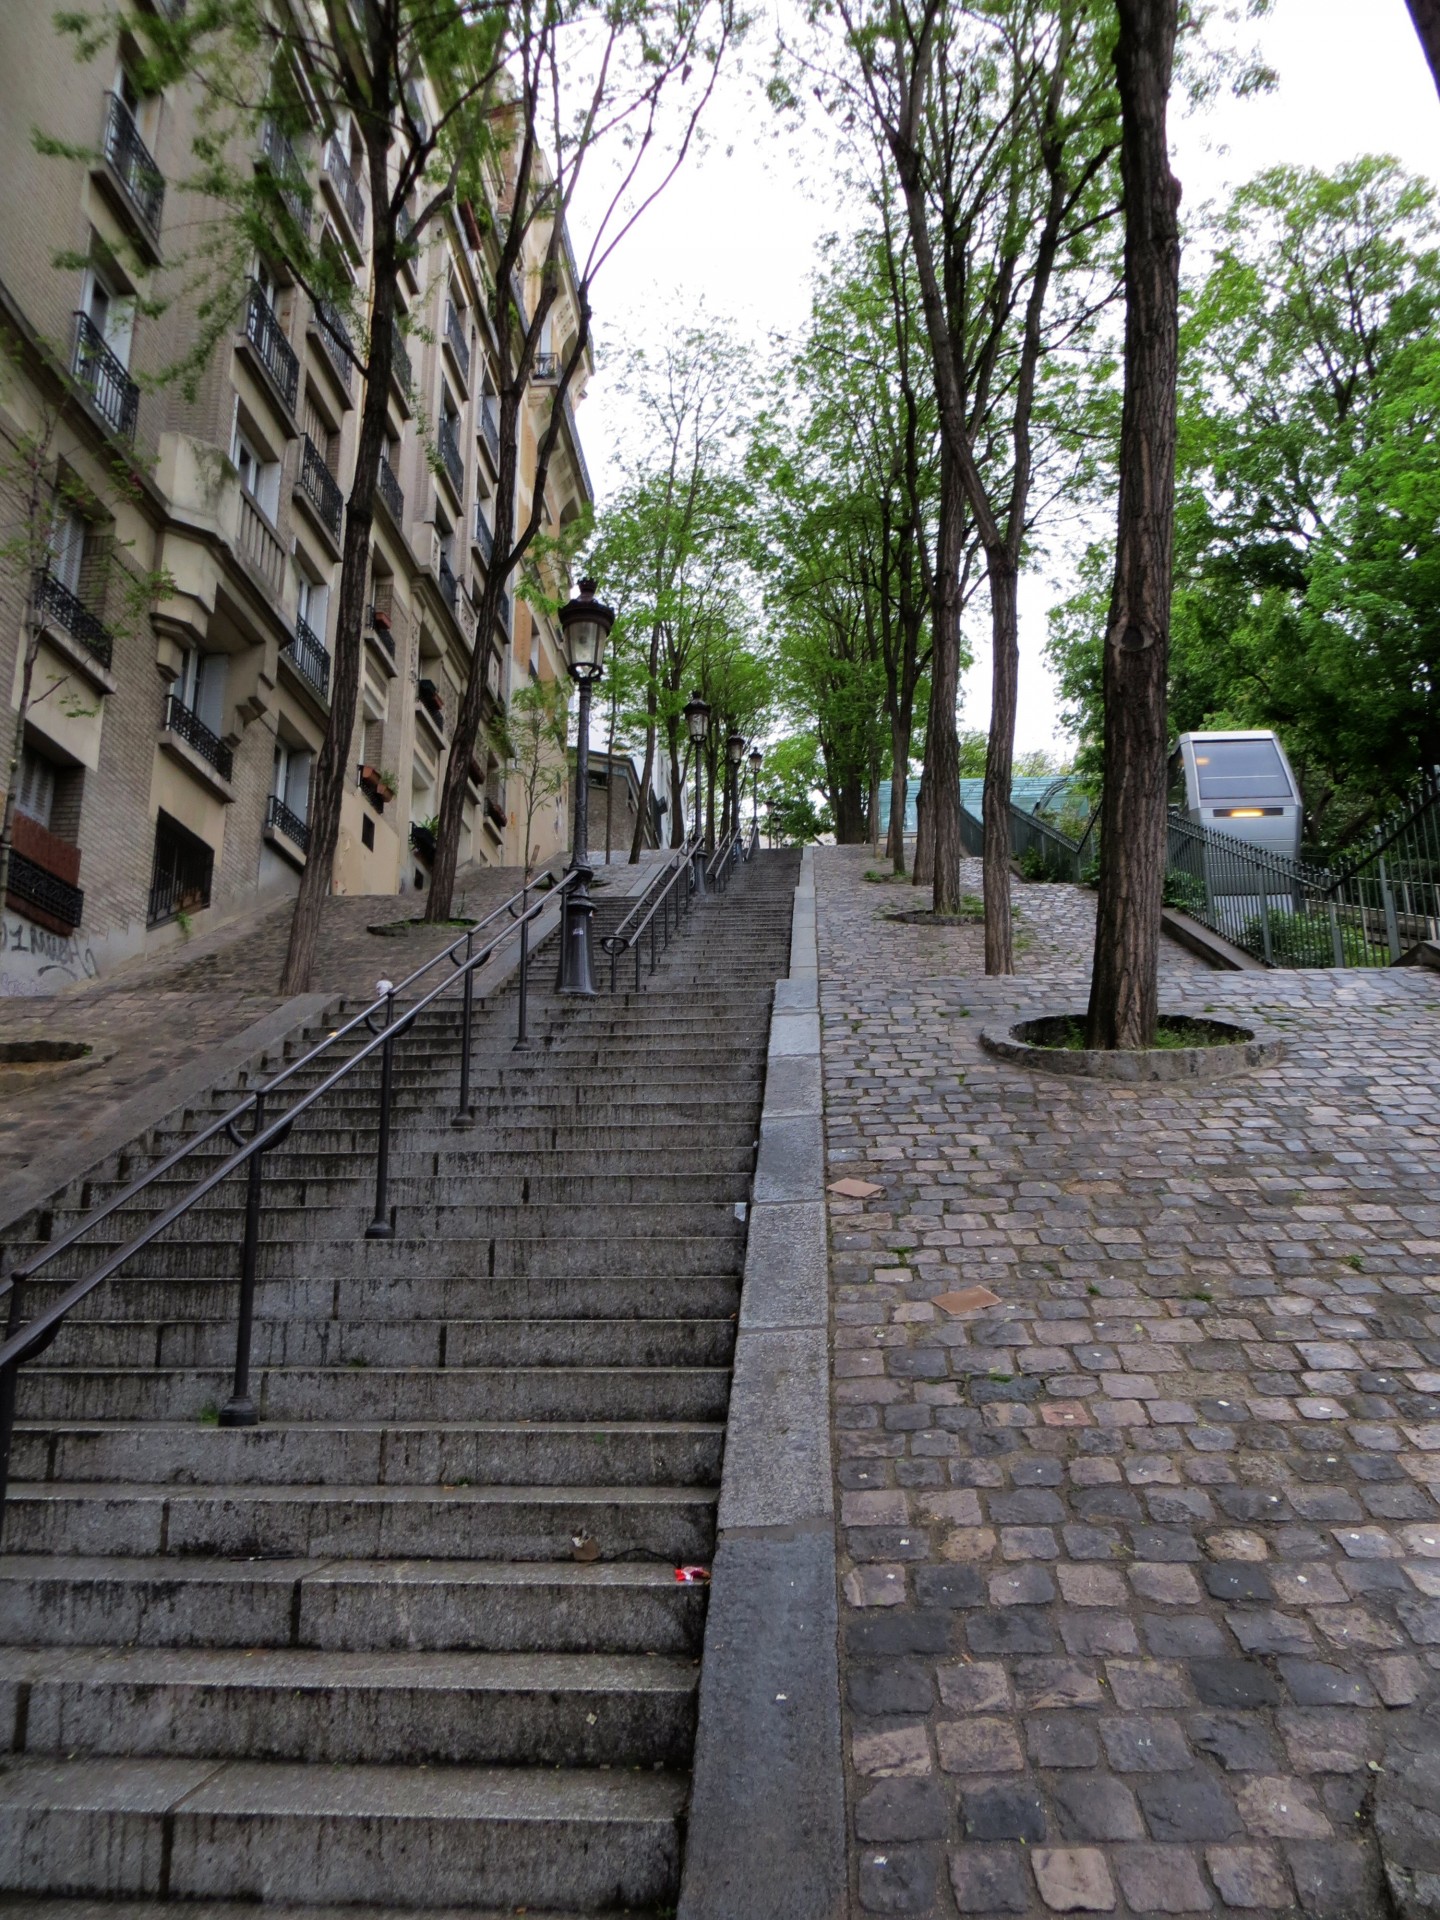 Staircase in Paris leading up to Sacre Coeur